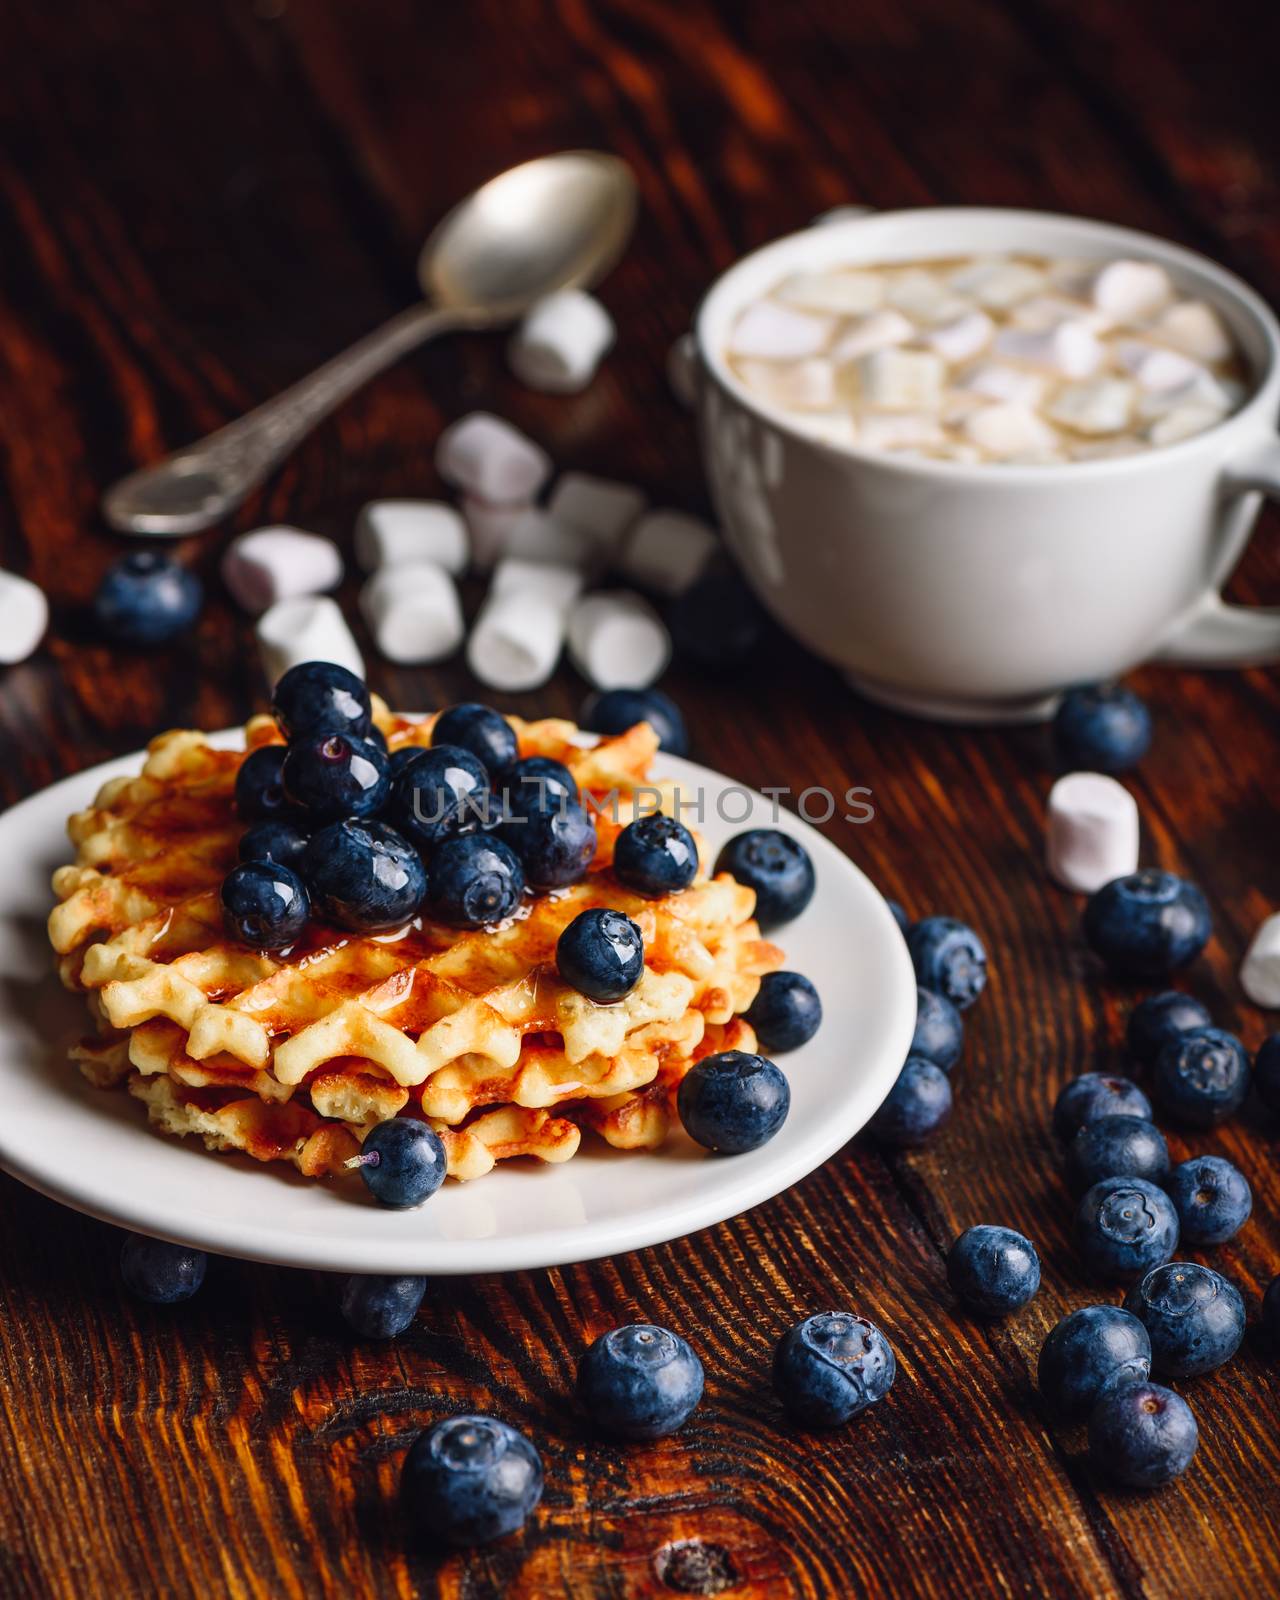 Waffles with Blueberry and Cup of Cocoa. by Seva_blsv